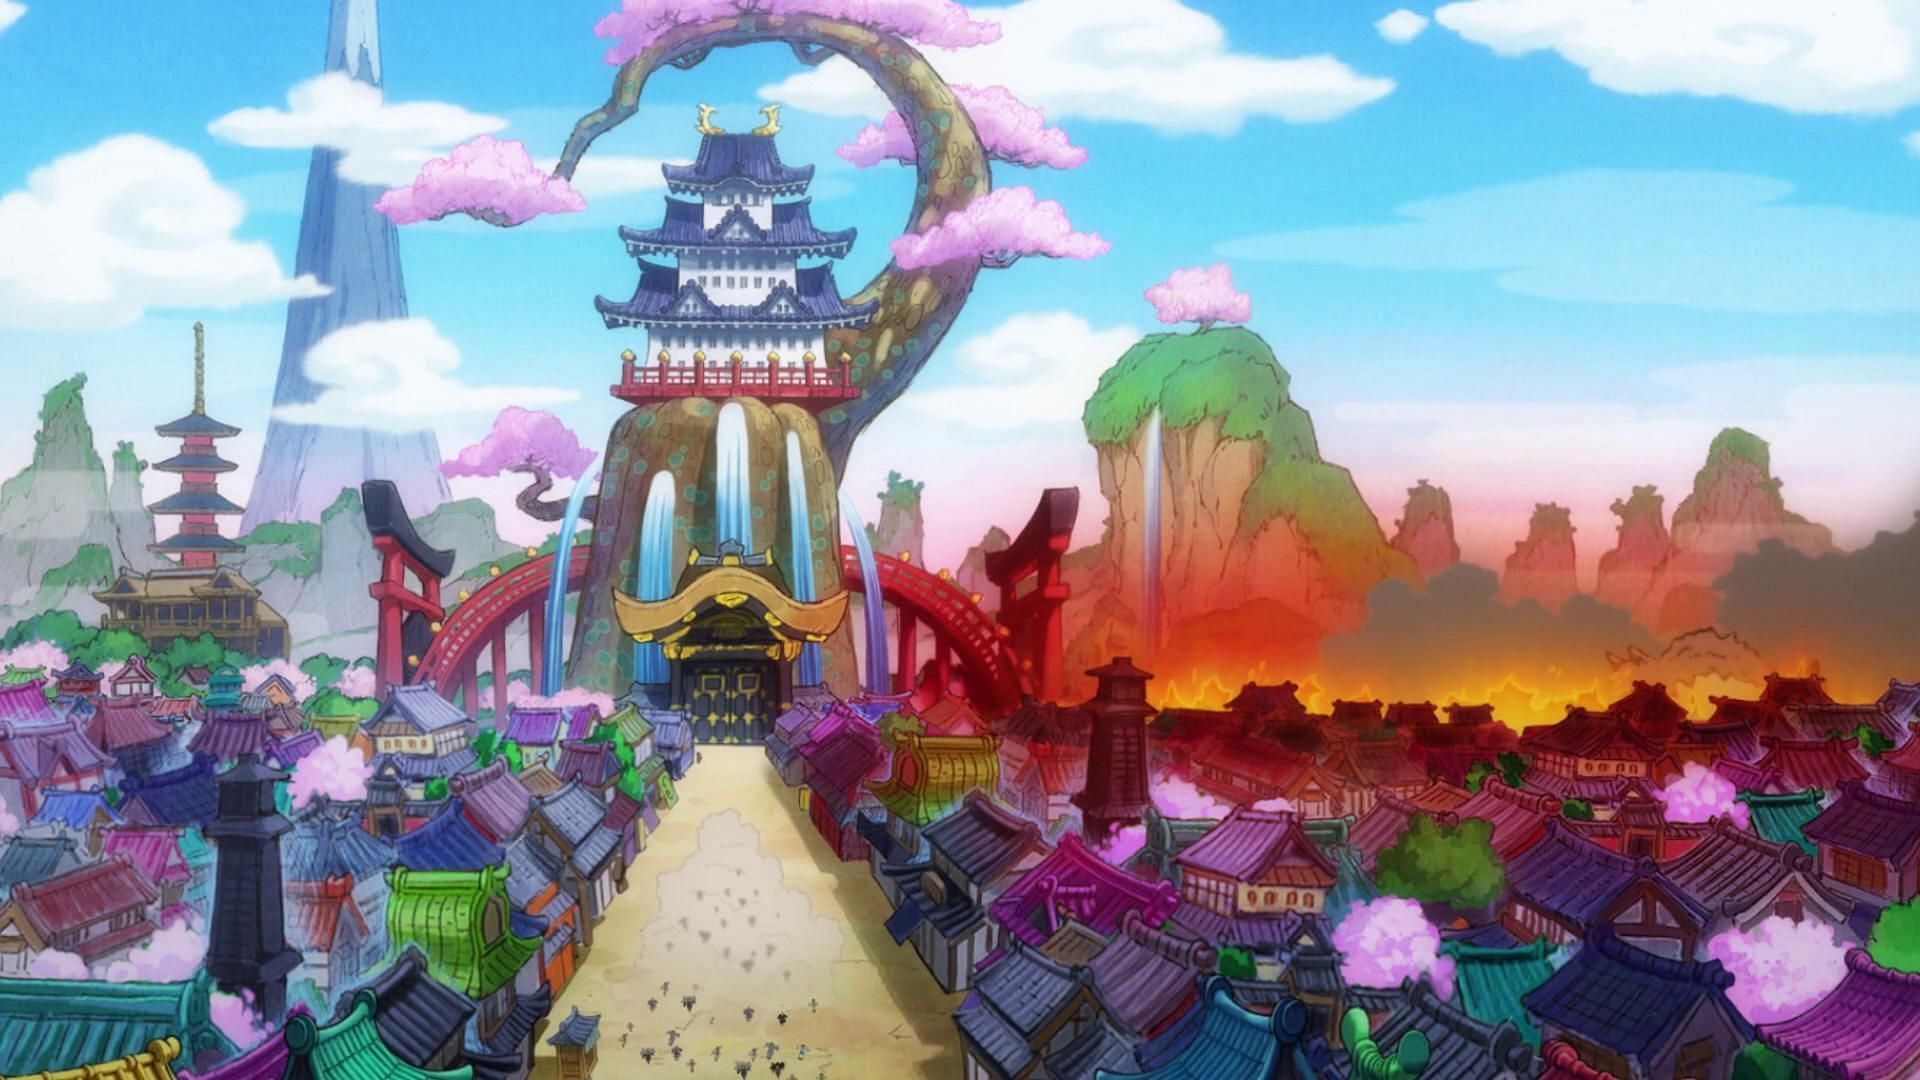 The Flower Capital in One Piece&#039;s Wano Country (Image via Toei Animation, One Piece)